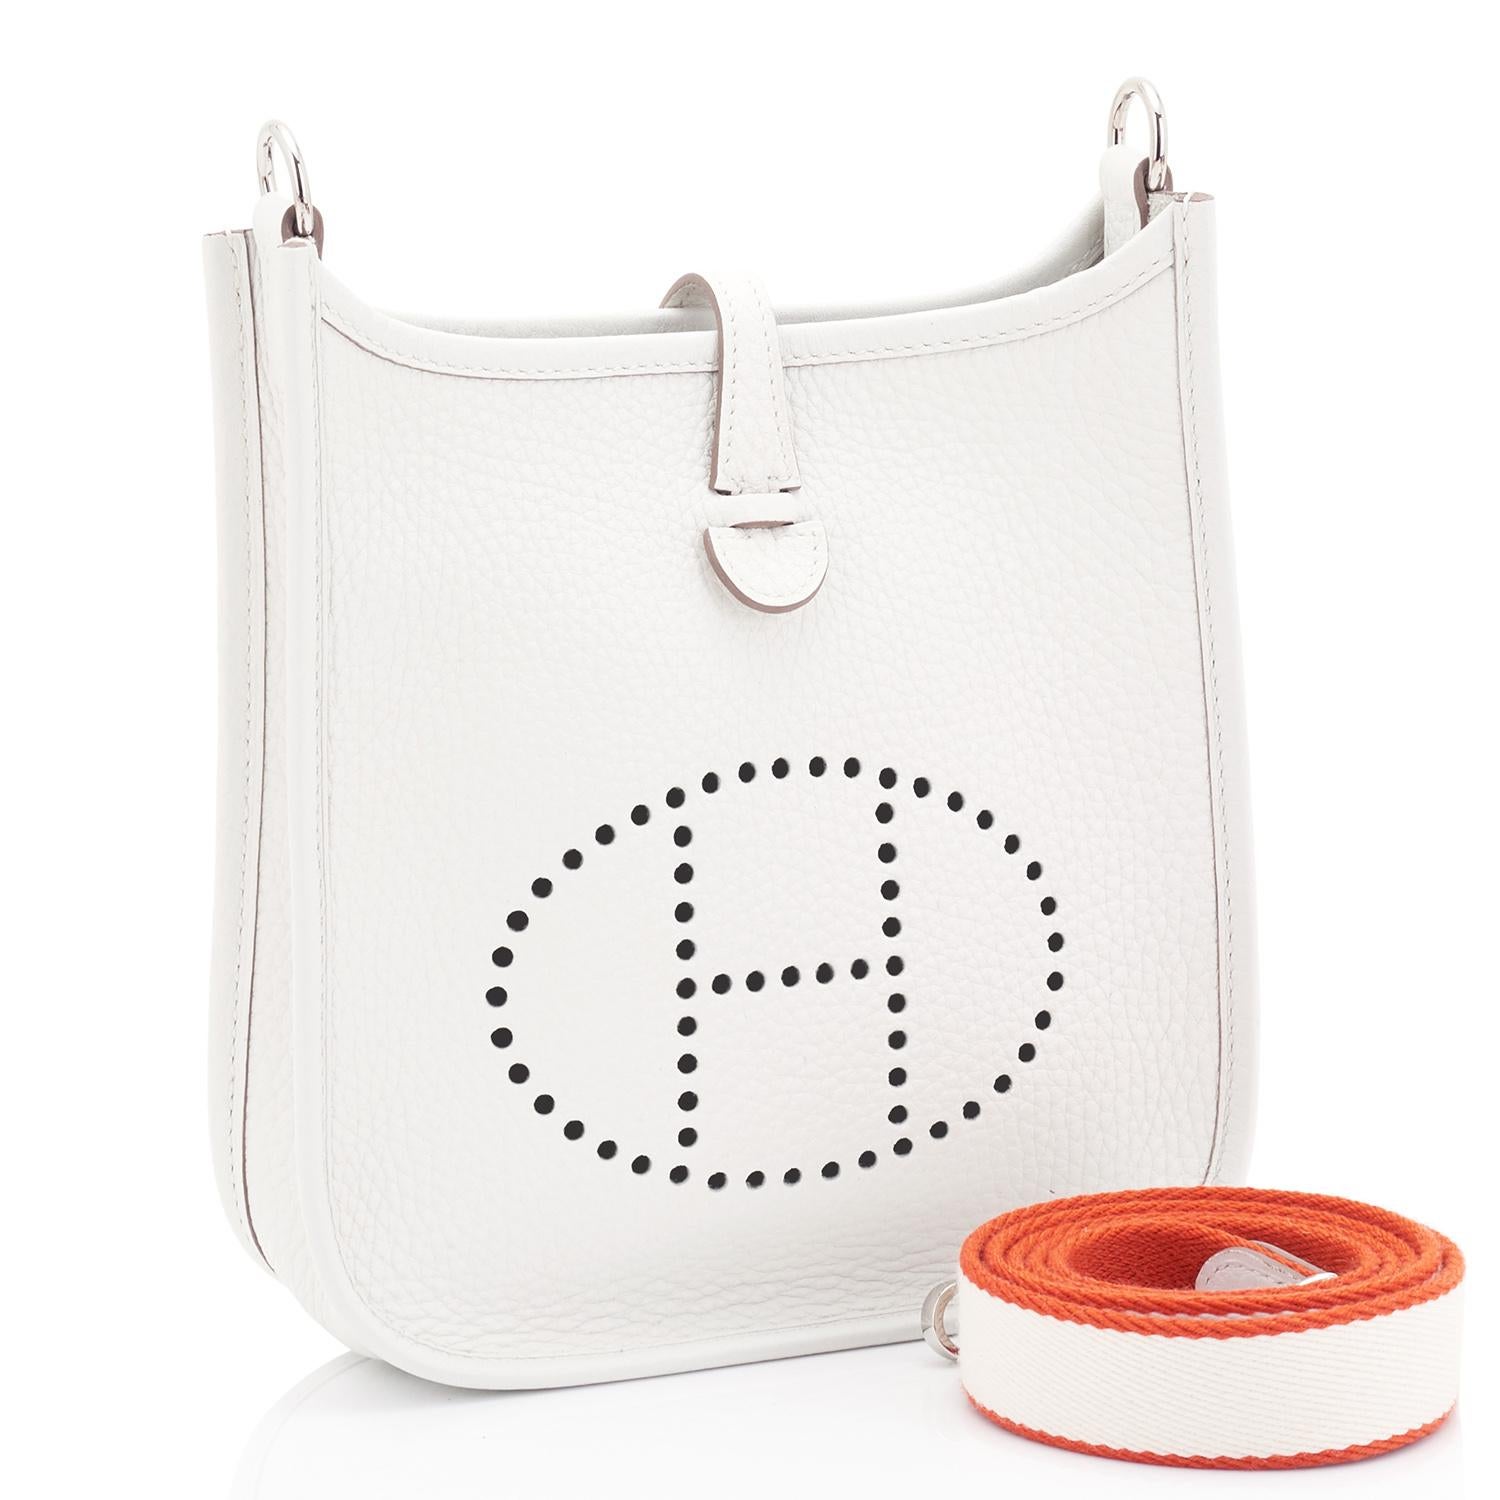 Hermes White Blanc Evelyne TPM Shoulder Cross Body Messenger Bag NEW
Brand New in Box. Store Fresh. Pristine Condition.
Perfect gift! Coming in full set with shoulder strap, Hermes sleepers, and Hermes box. 
This rare White Evelyne Tres Petite